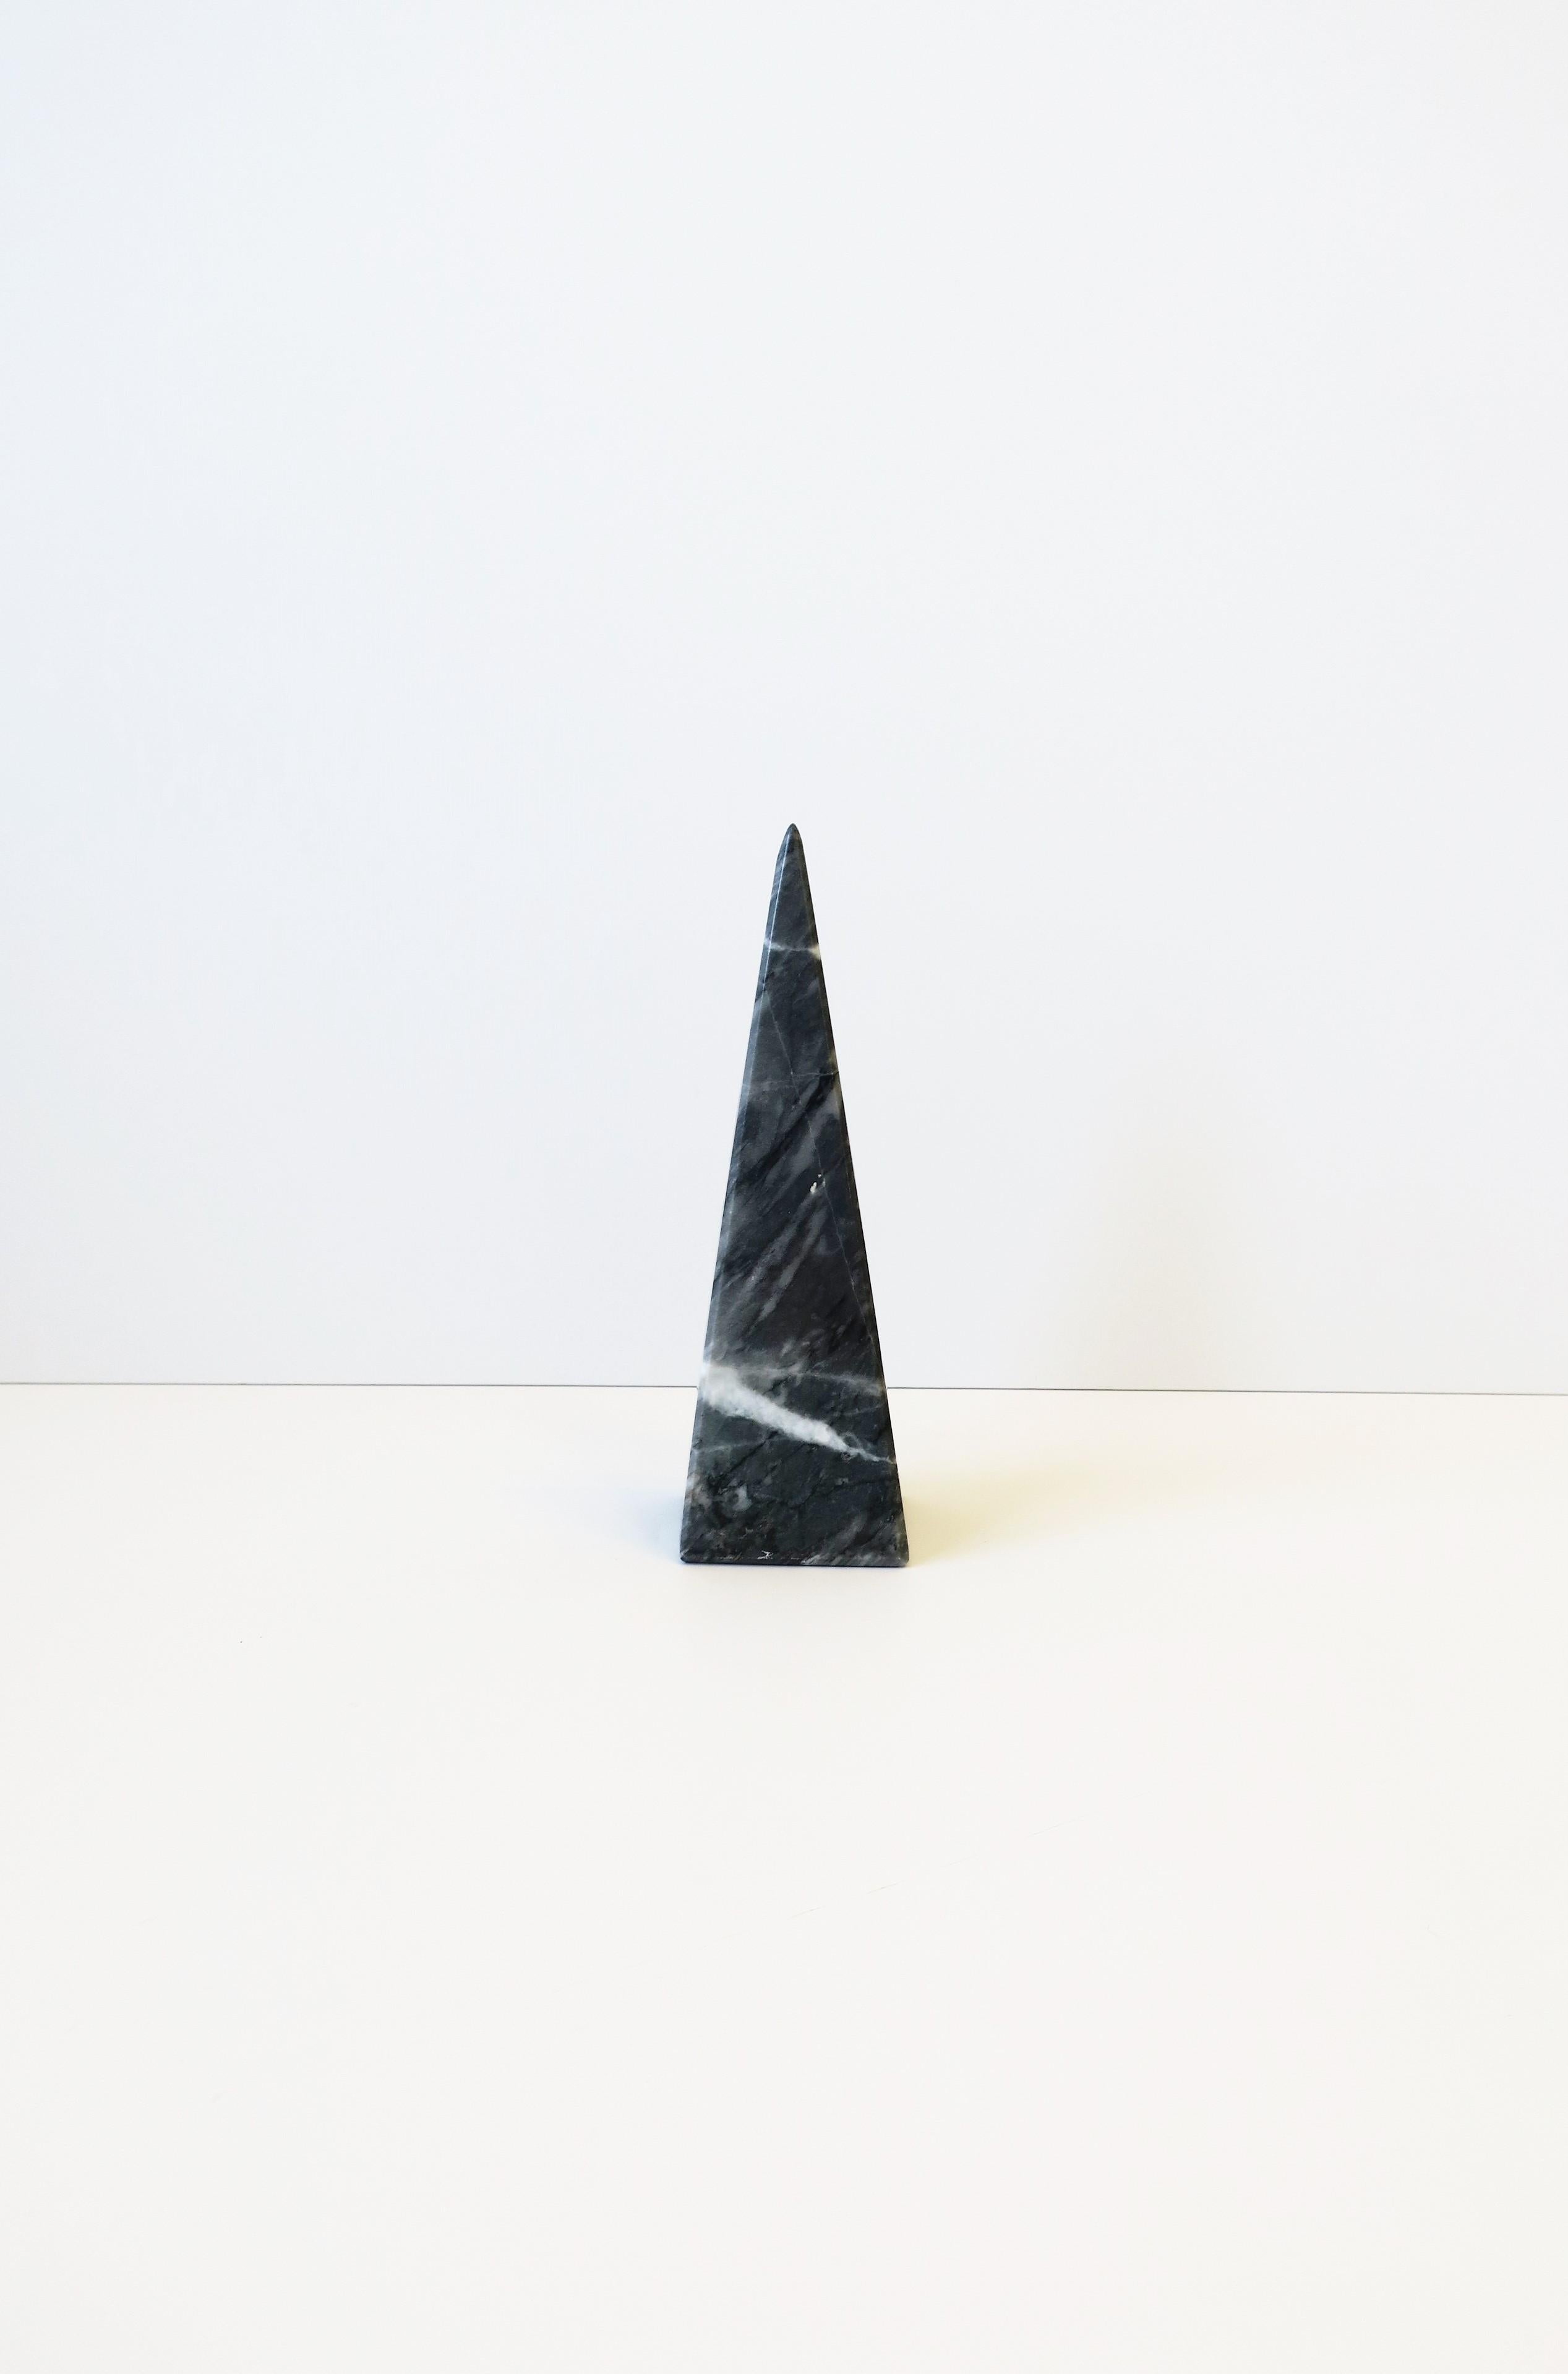 A black, charcoal and white marble pyramid 'Obelisk style', circa 1970s, 20th century. Dimensions: 2.63